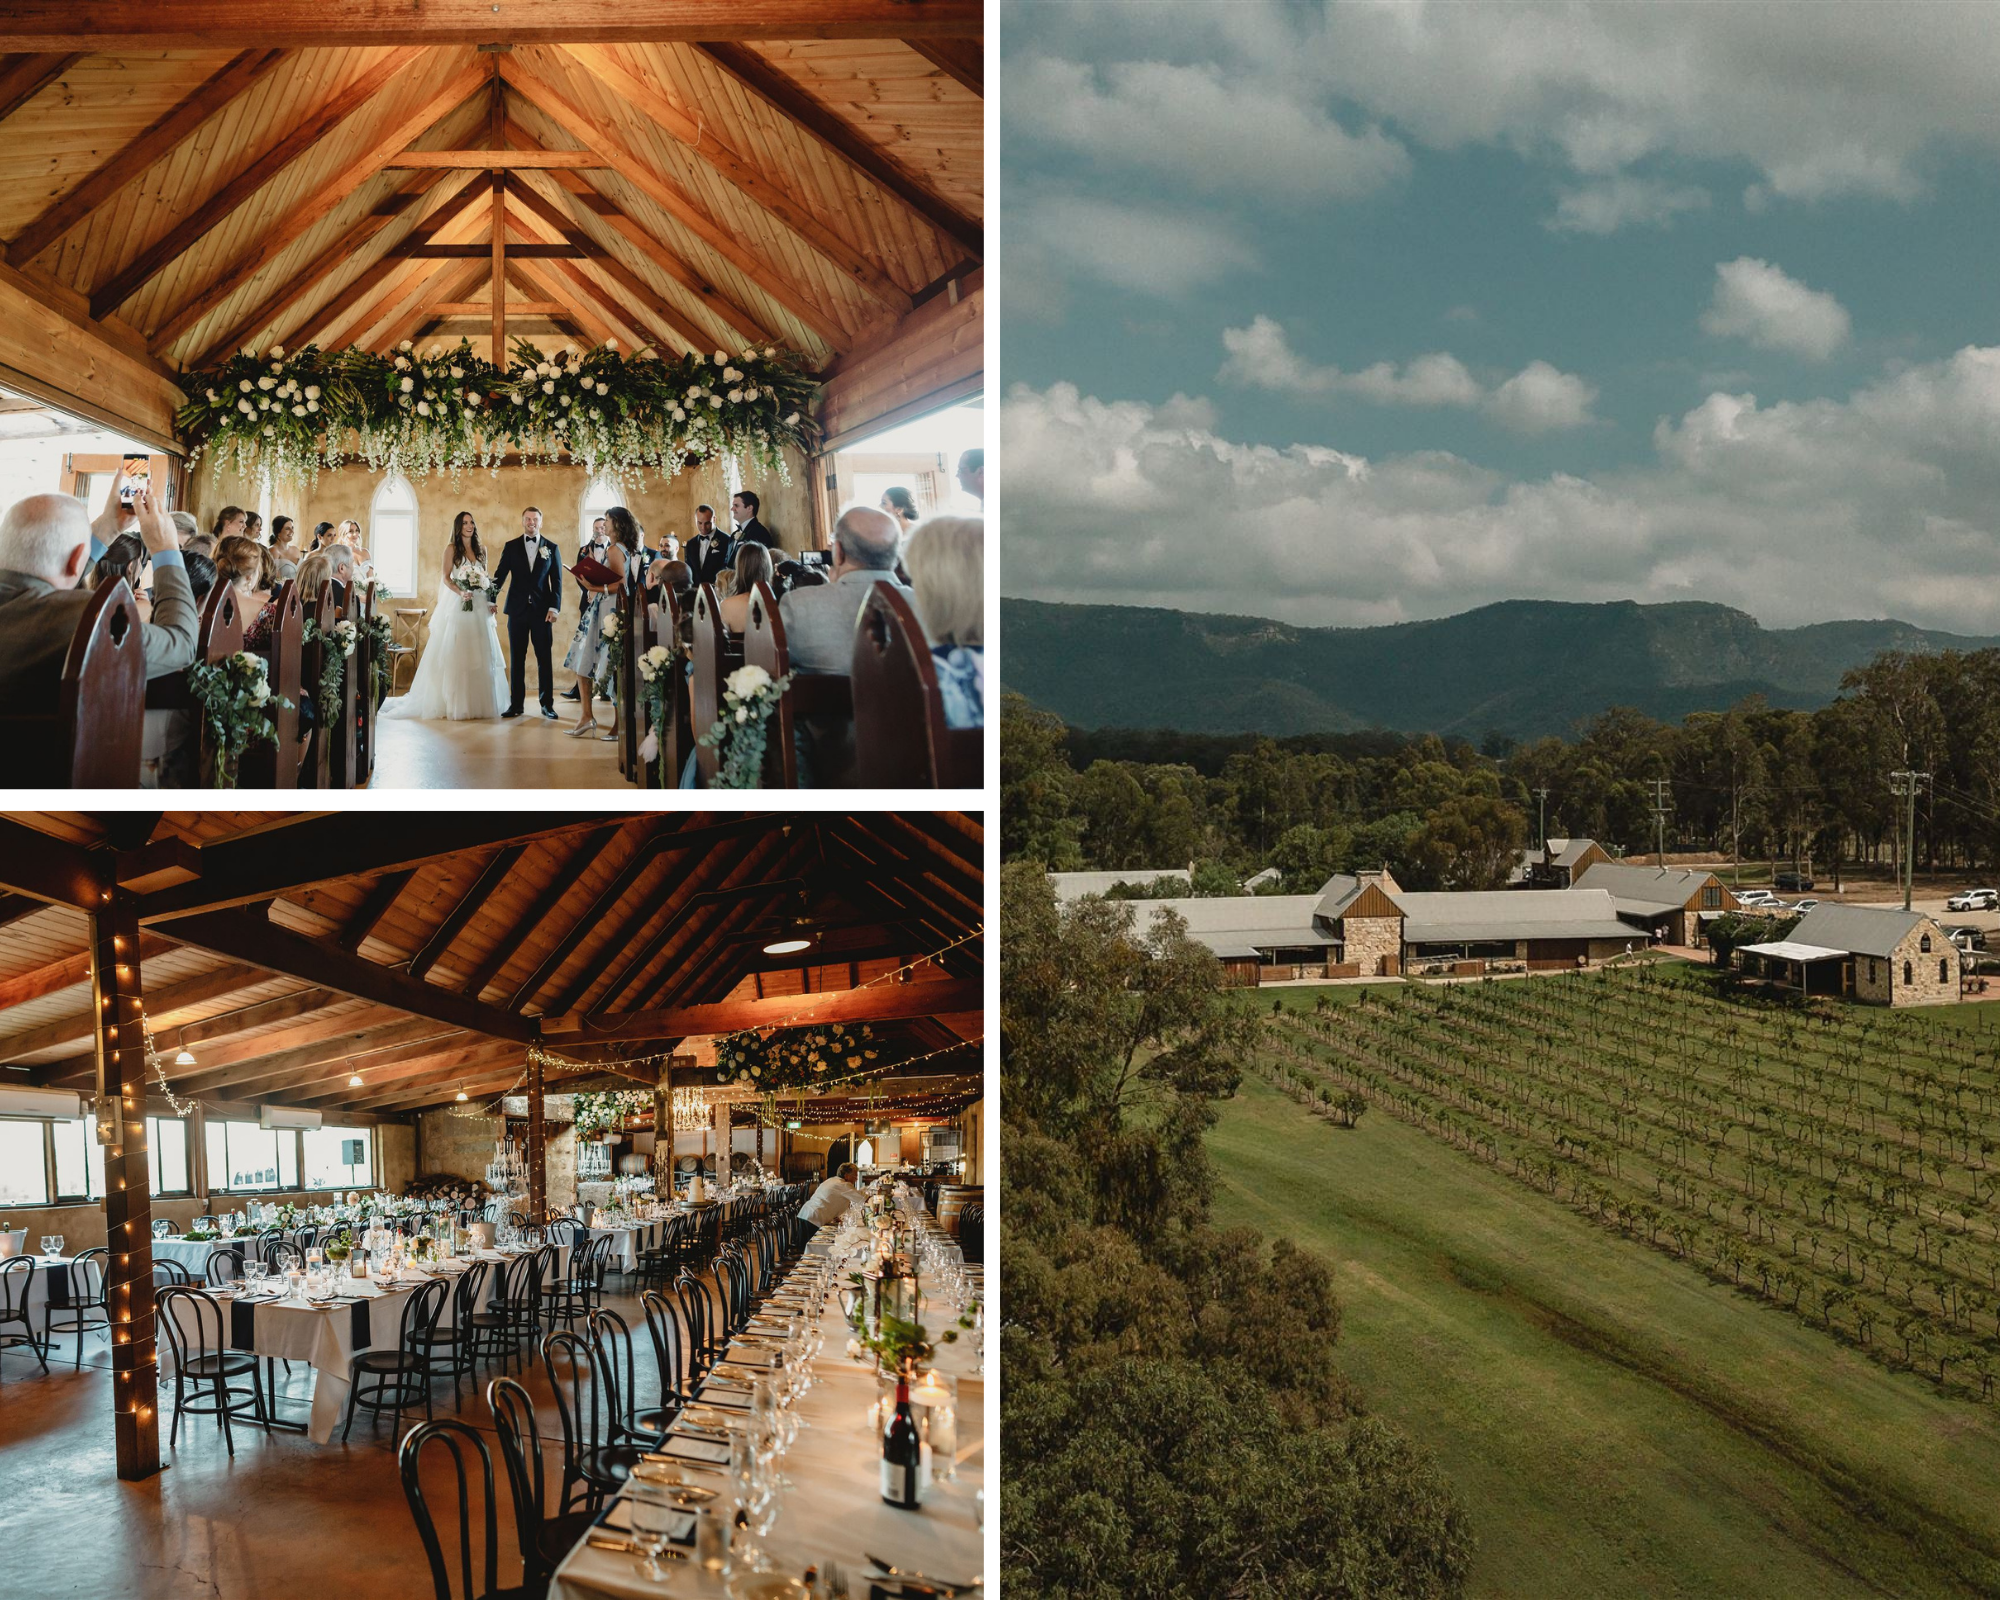 Peppers Creek country wedding venue